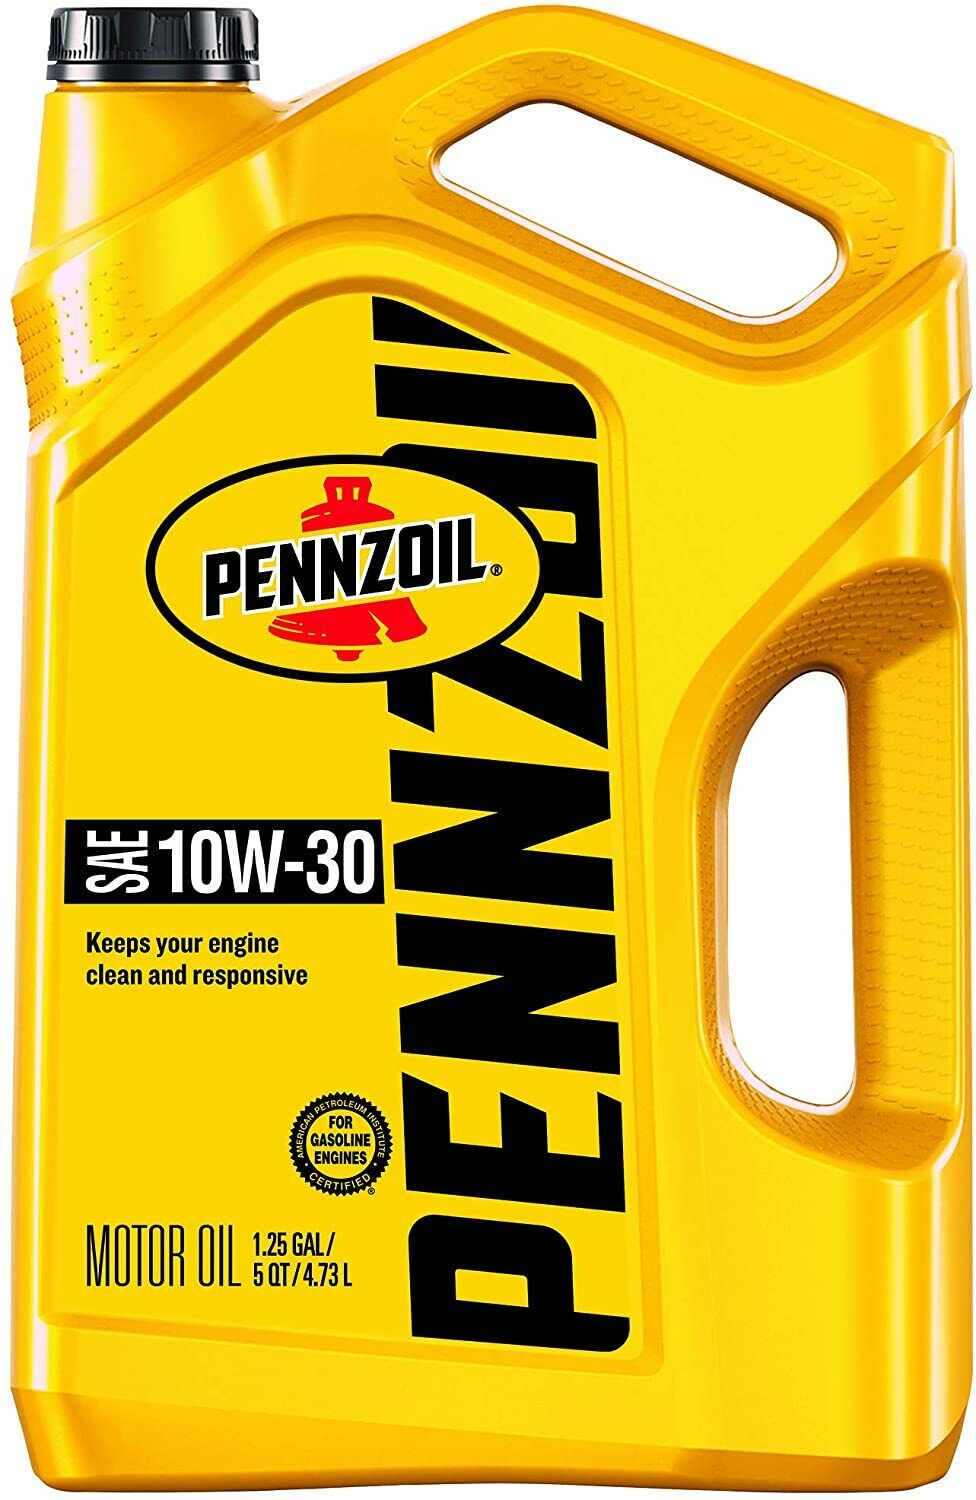 pennzoil conventional motor oil protection (sn/gf) 10w-30 5 quart - pack of 1